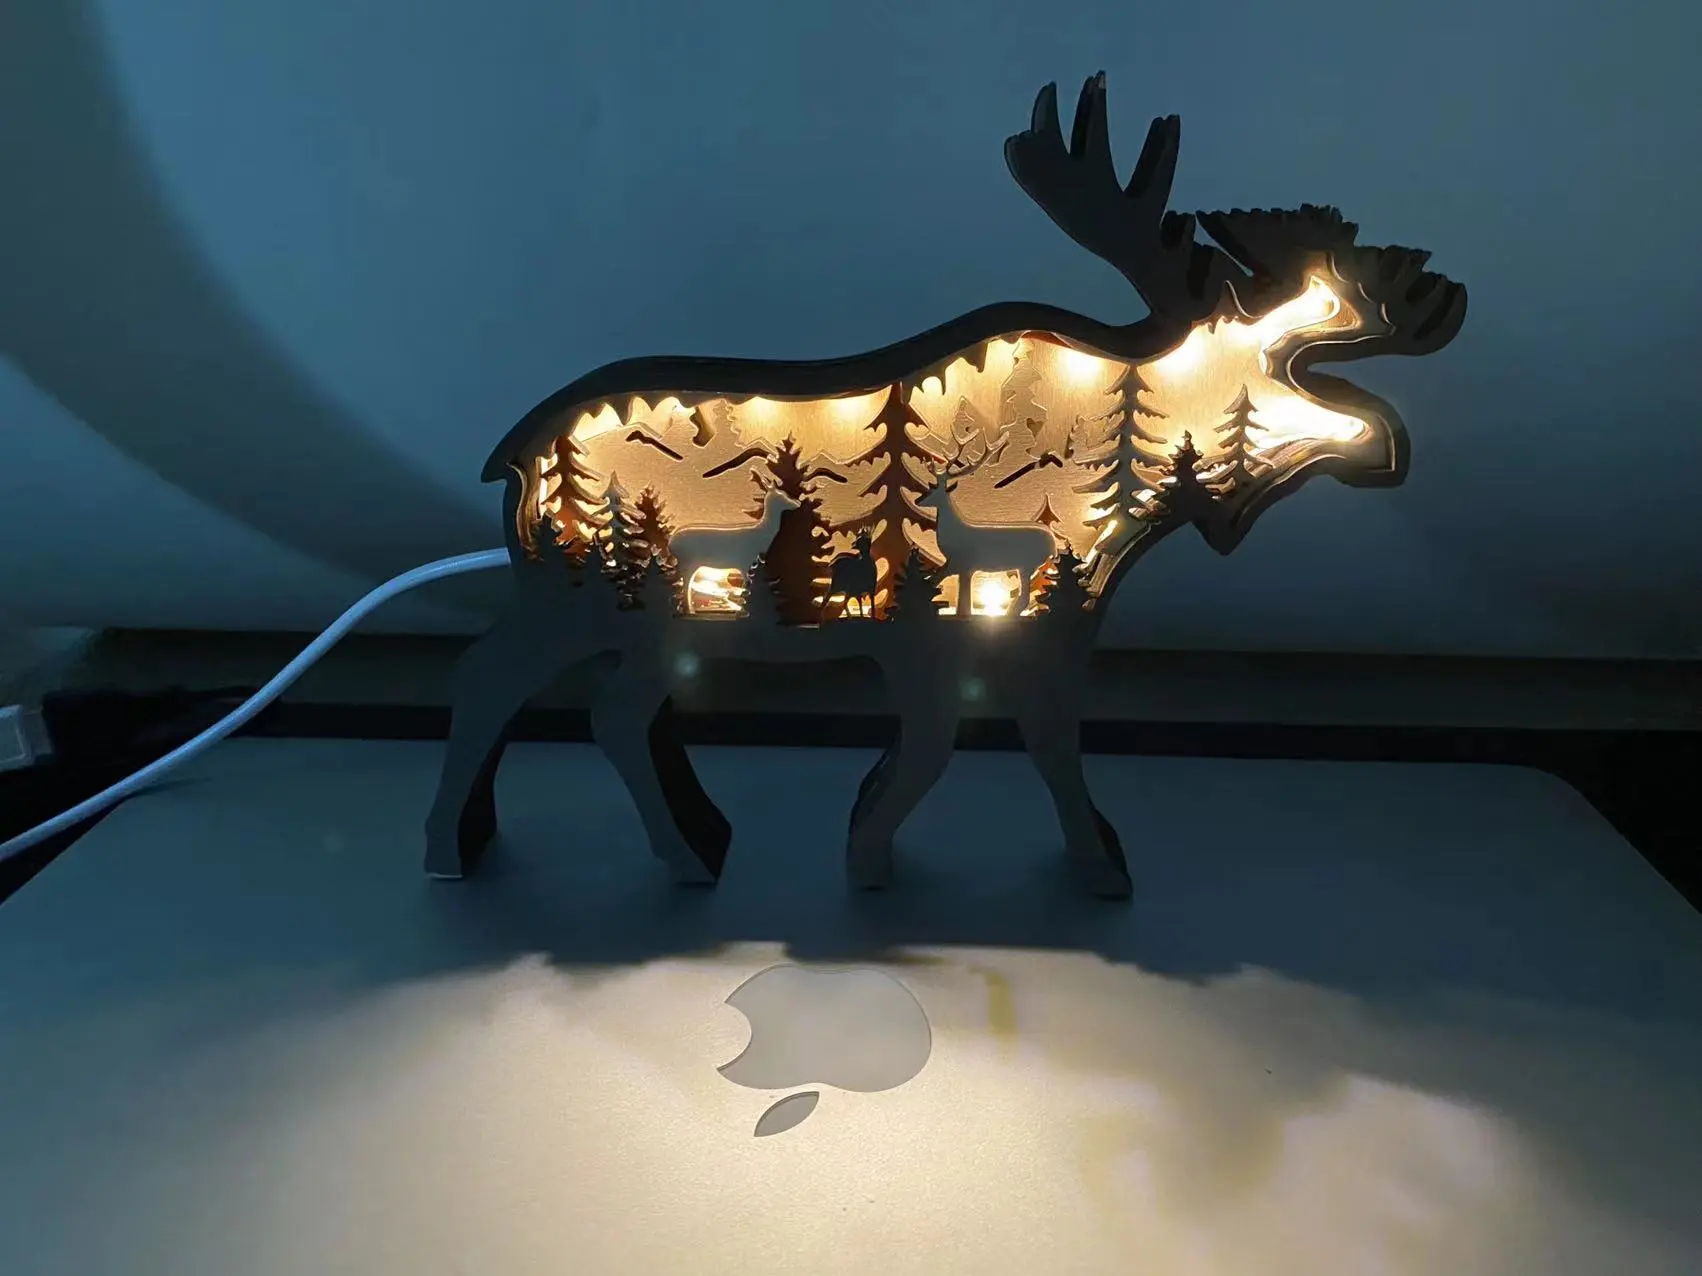 Moose 3D Wooden Carving,Suitable for Home Decoration,Holiday Gift,Art Night Light